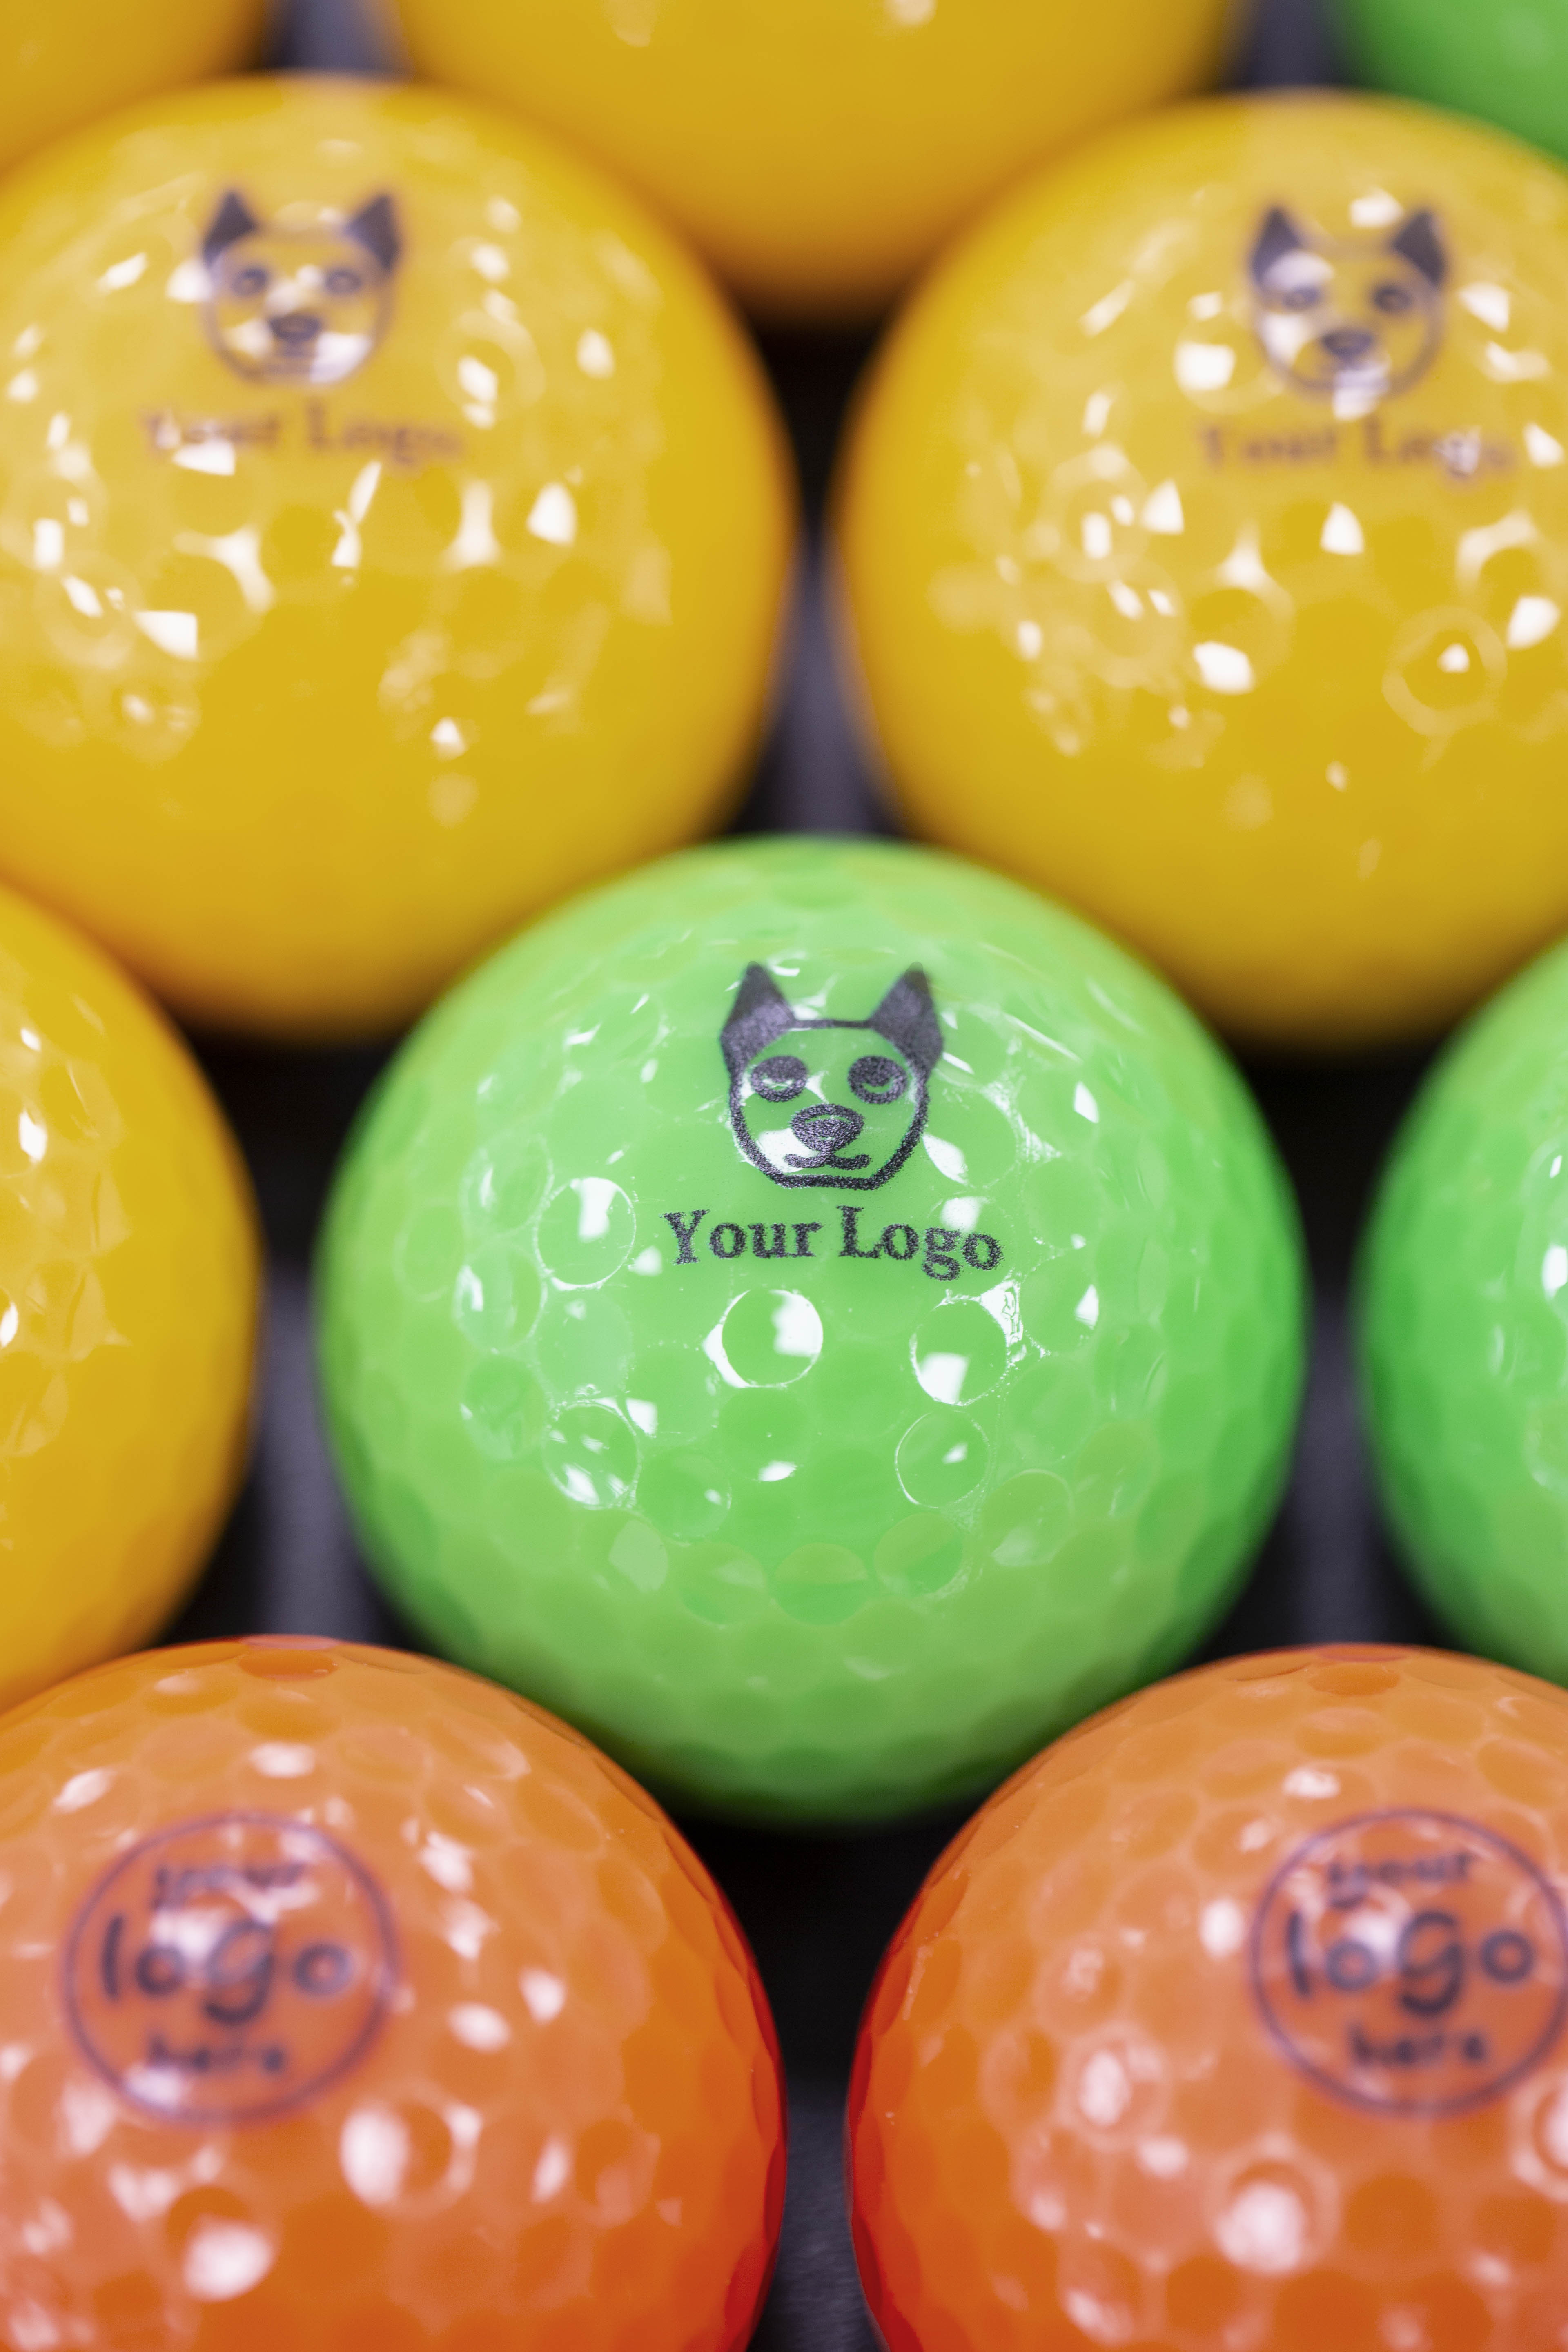 Green 'your logo' mini golf ball surrounded by orange and yellow branded mini golf balls